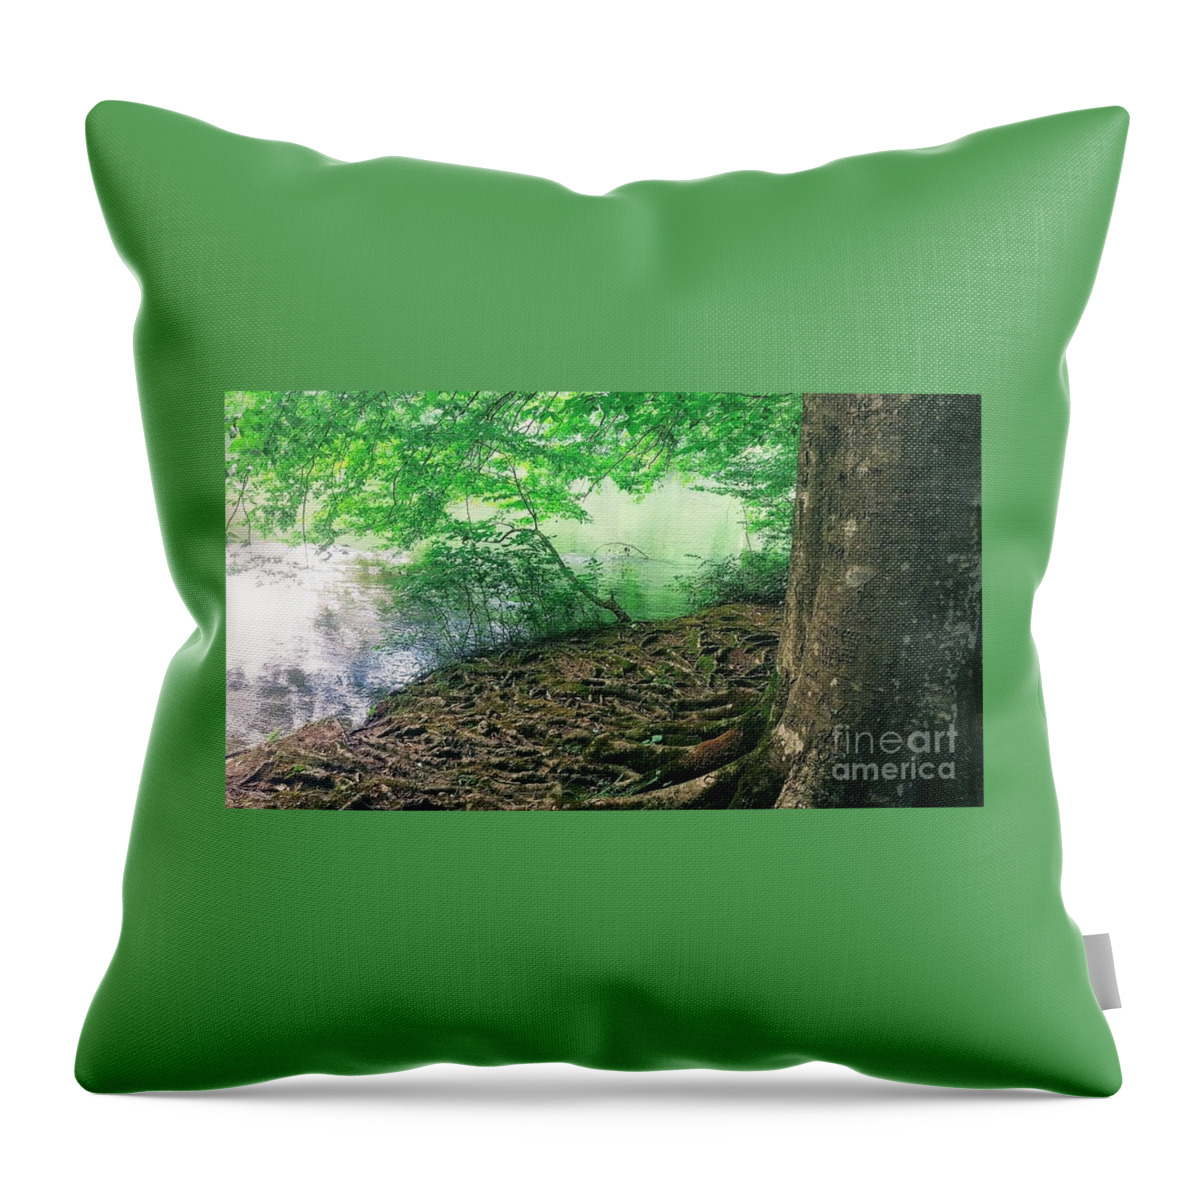 Tree Throw Pillow featuring the photograph Roots On The River by Rachel Hannah